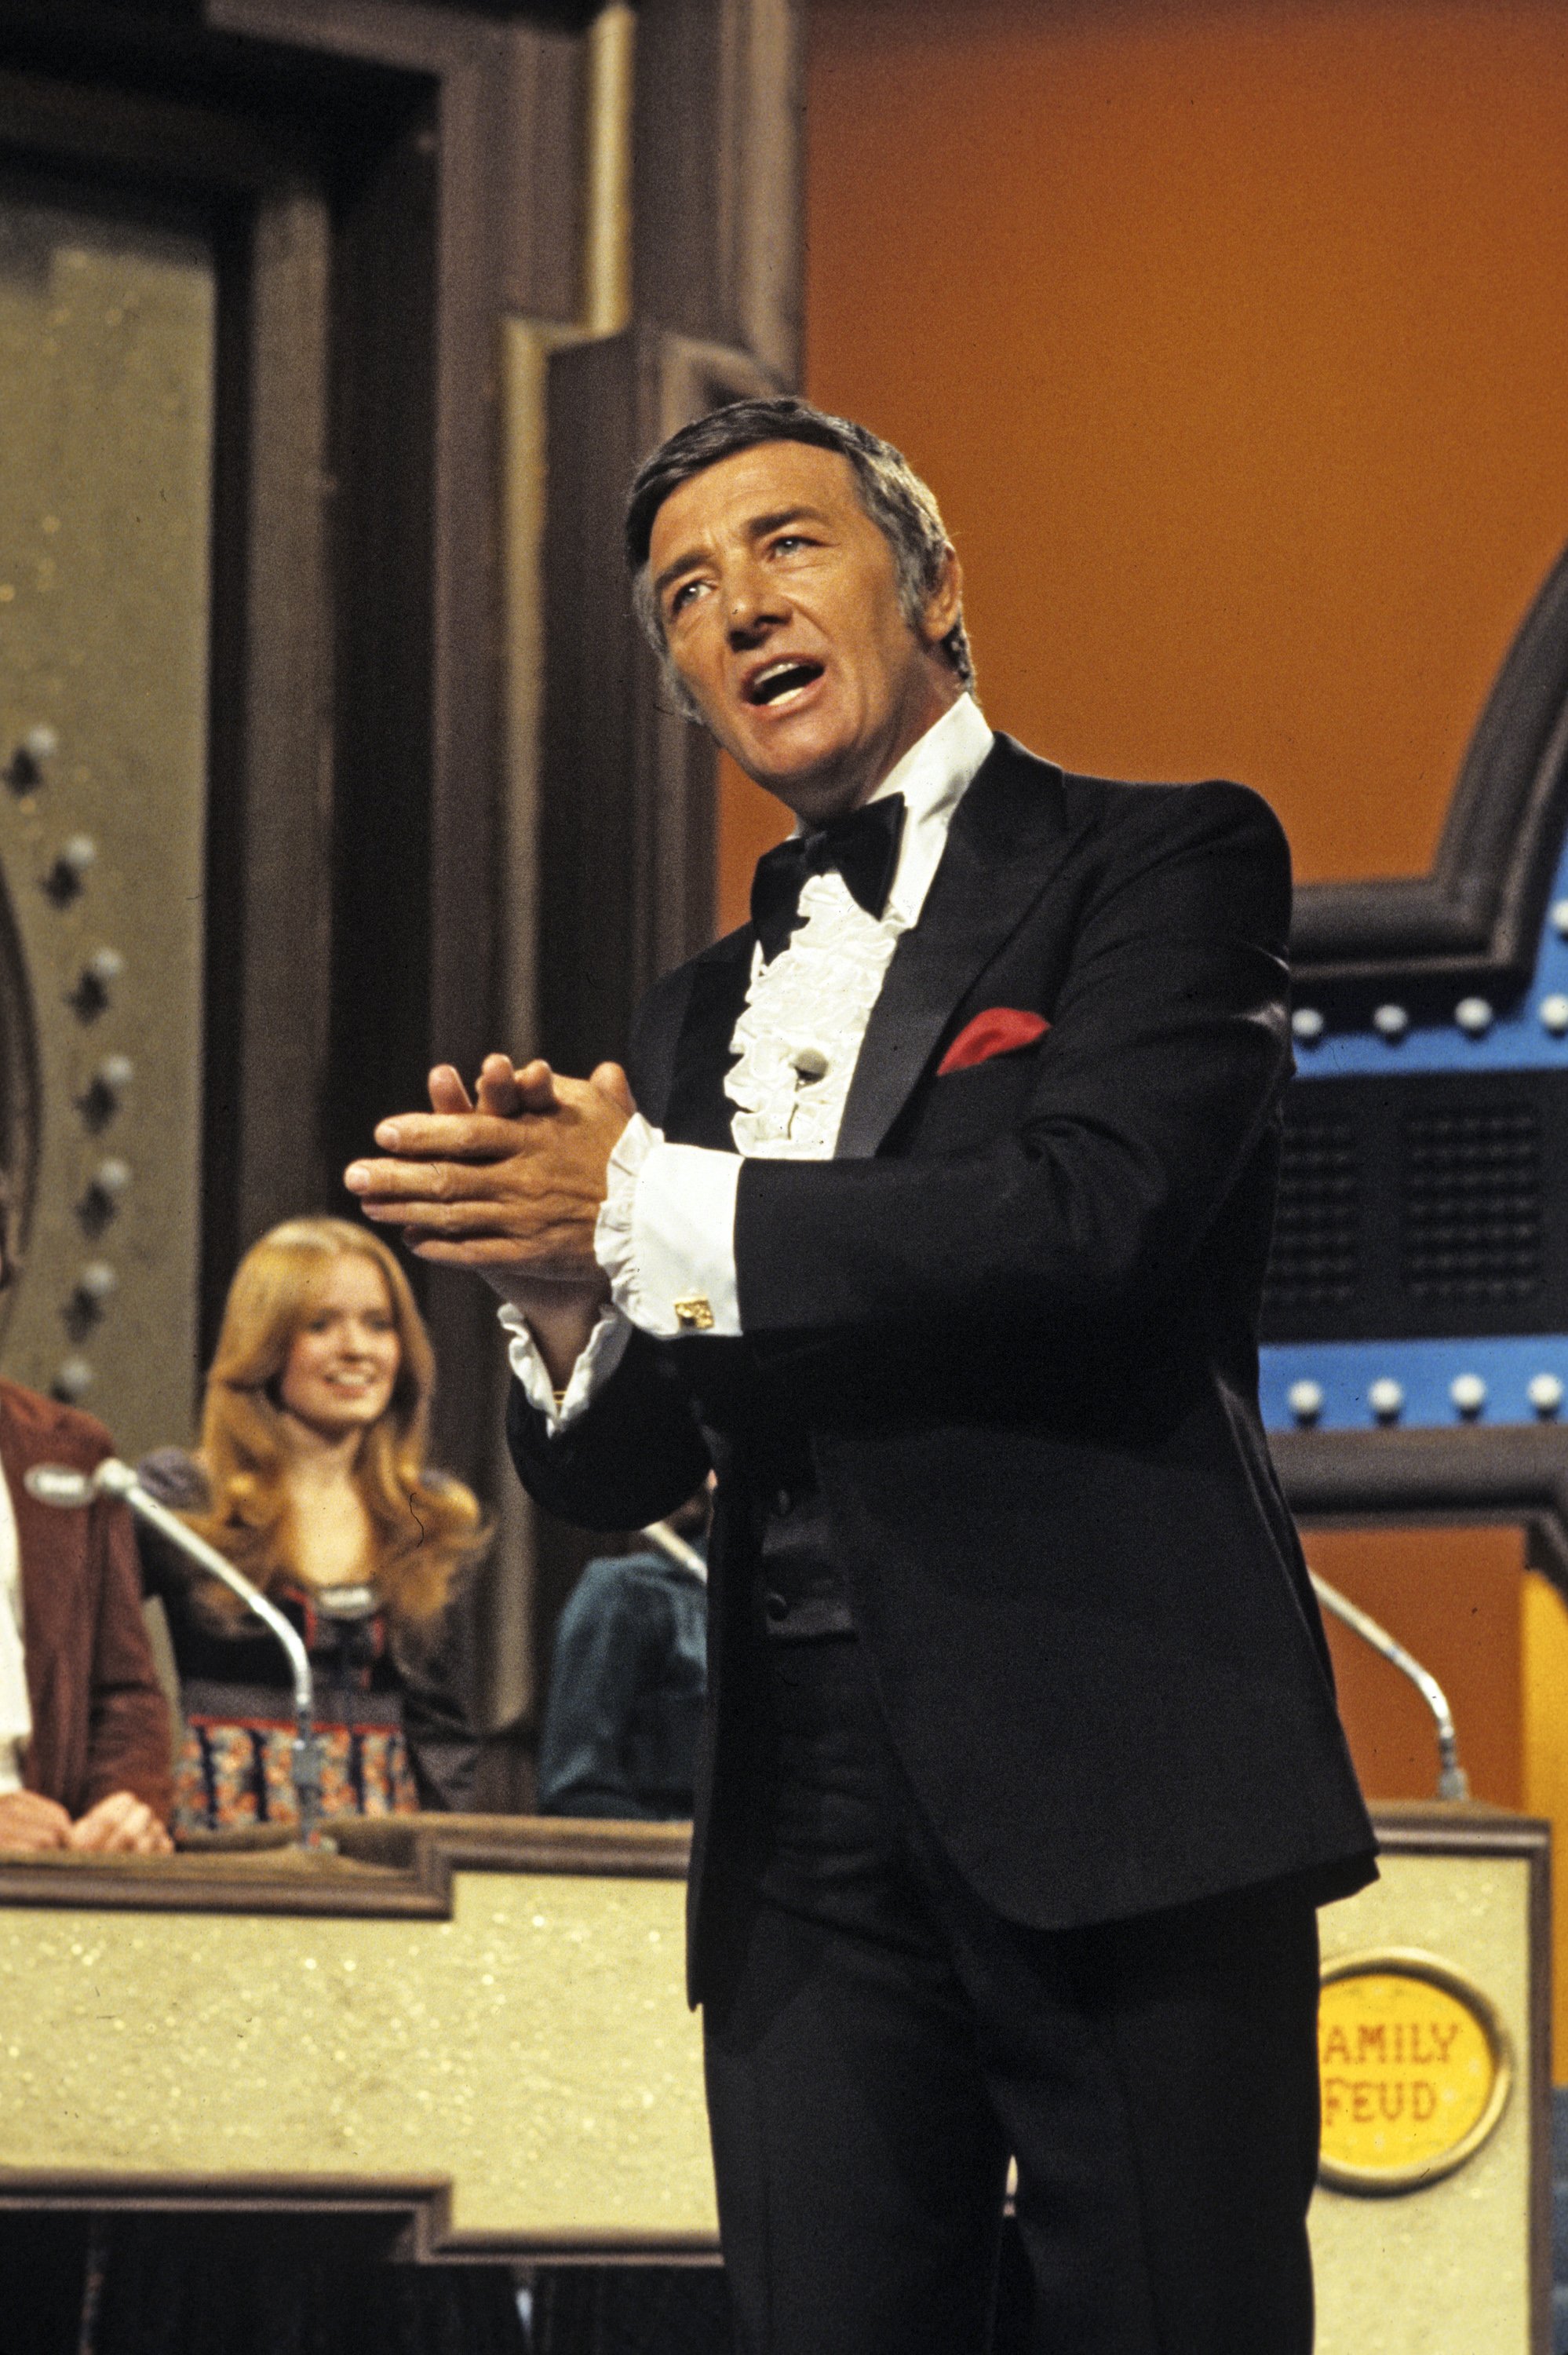 Richard Dawson on an episode of "Family Feud" on April 12, 1978. | Source: ABC Photo Archives/Disney General Entertainment Content/Getty Images